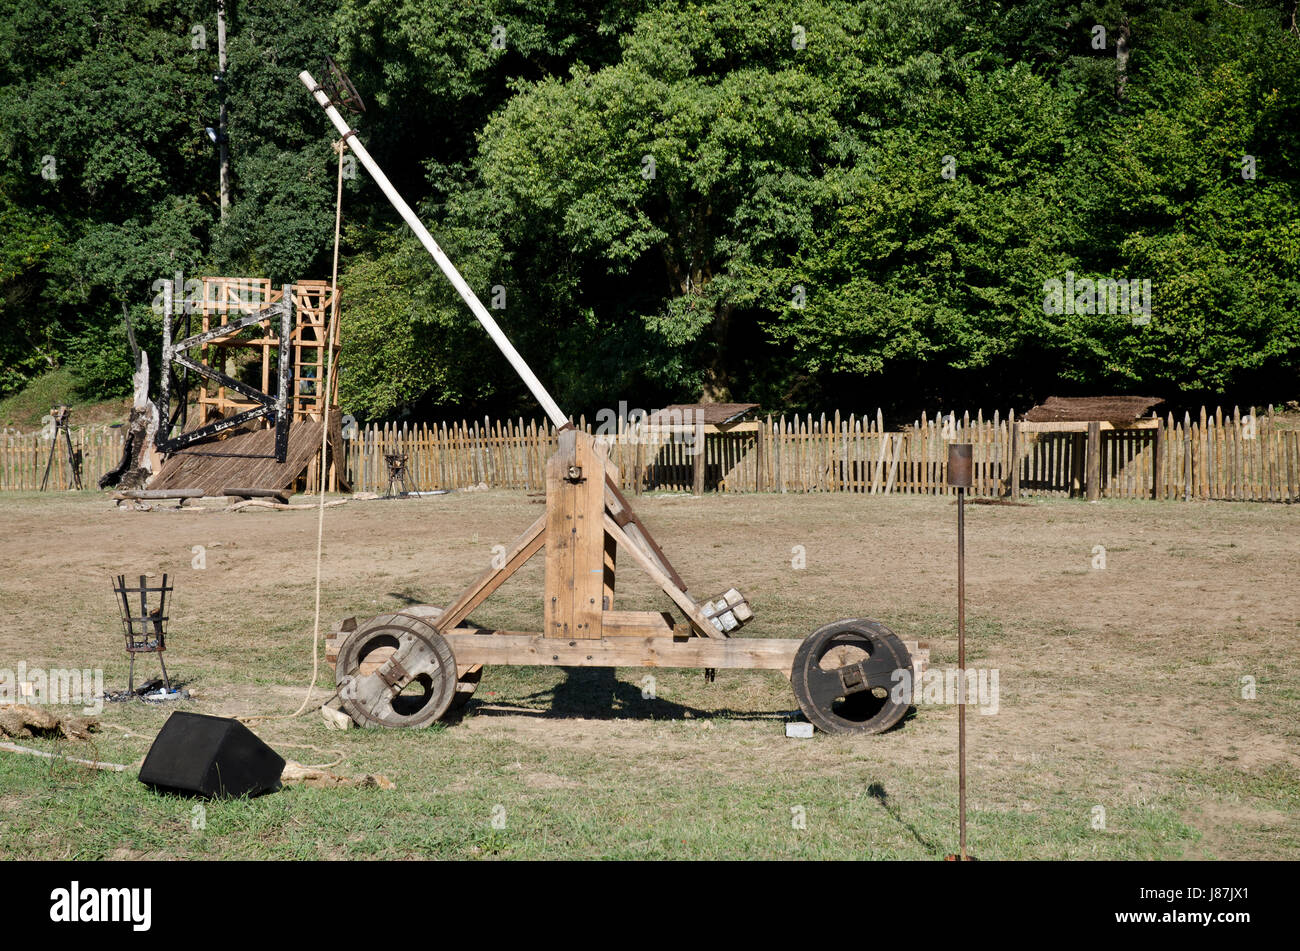 tree, trees, wood, war, history, catapult, medieval, wooden, old, Stock Photo